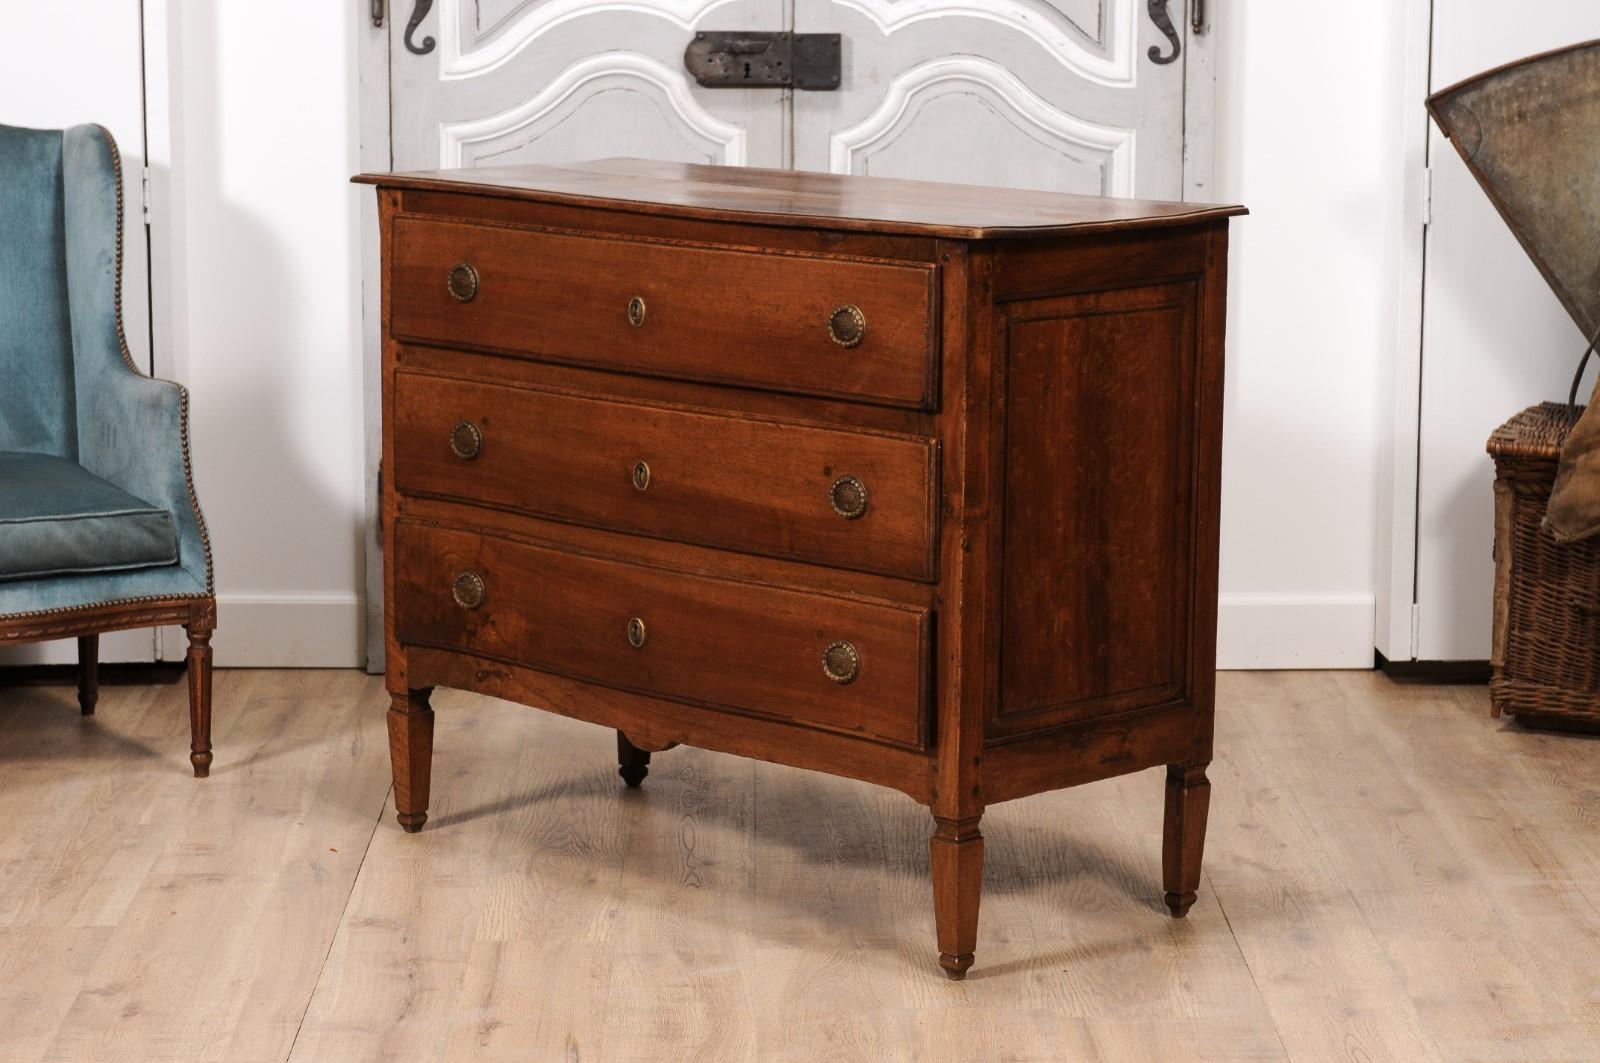 Italian 1820s Serpentine Front Walnut Commode with Three Drawers For Sale 5